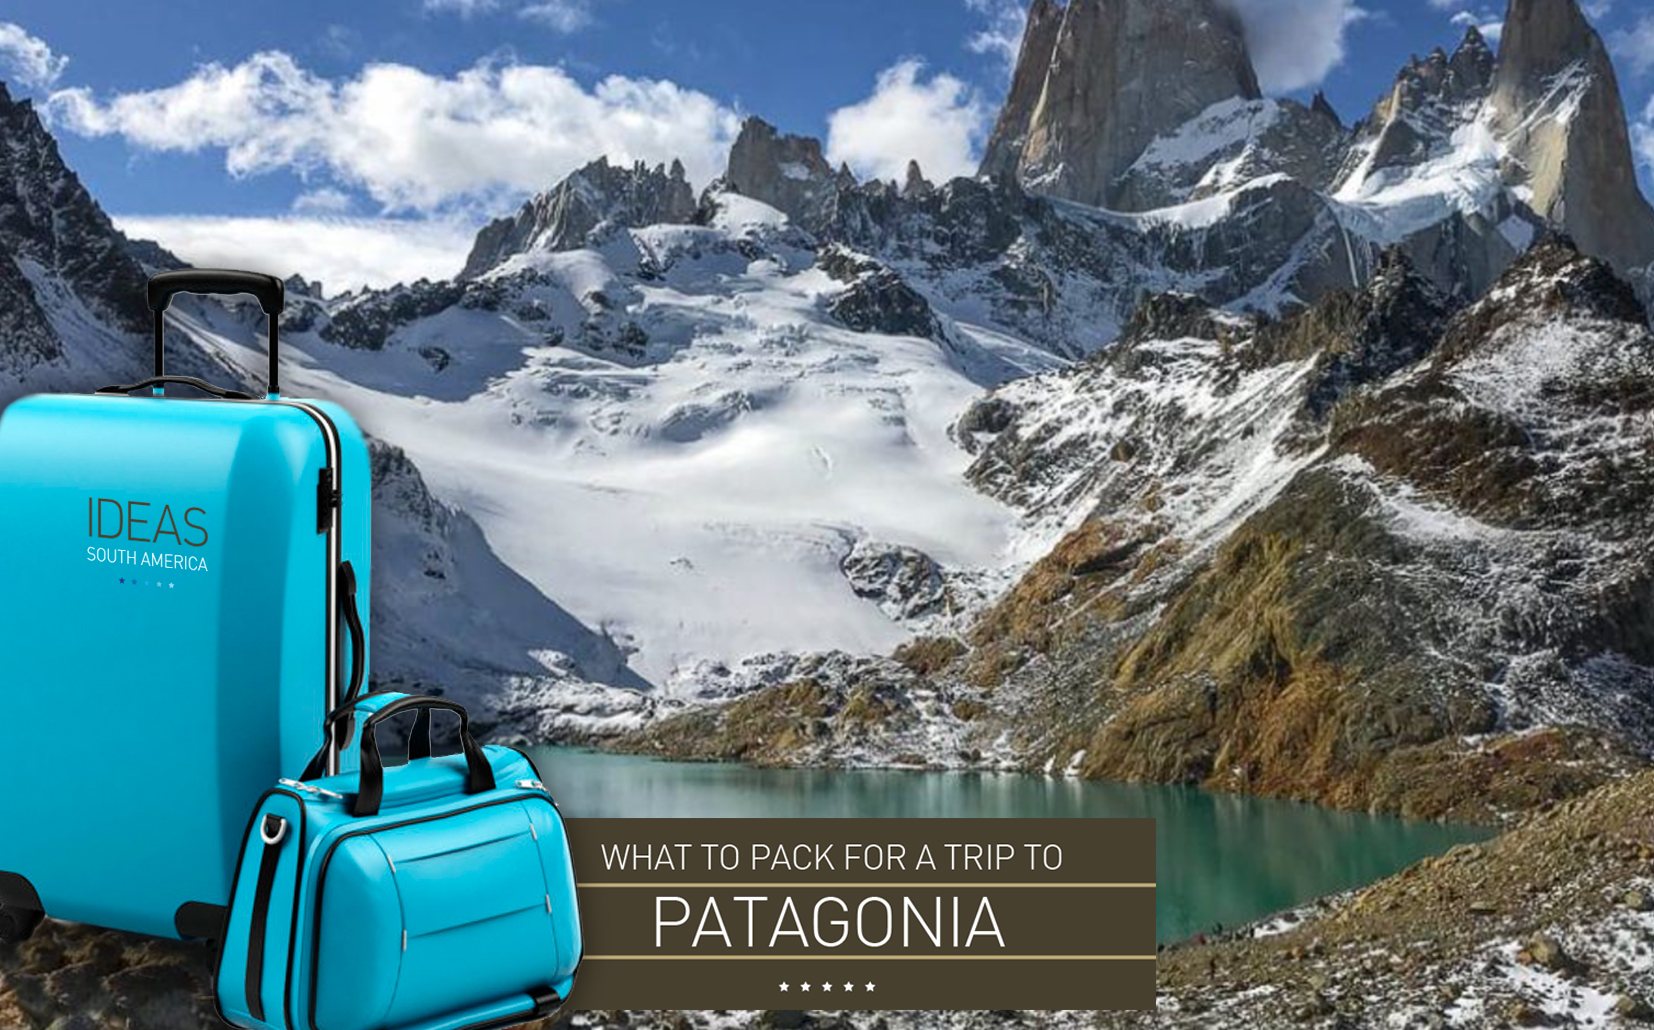 What to pack for a trip to Patagonia